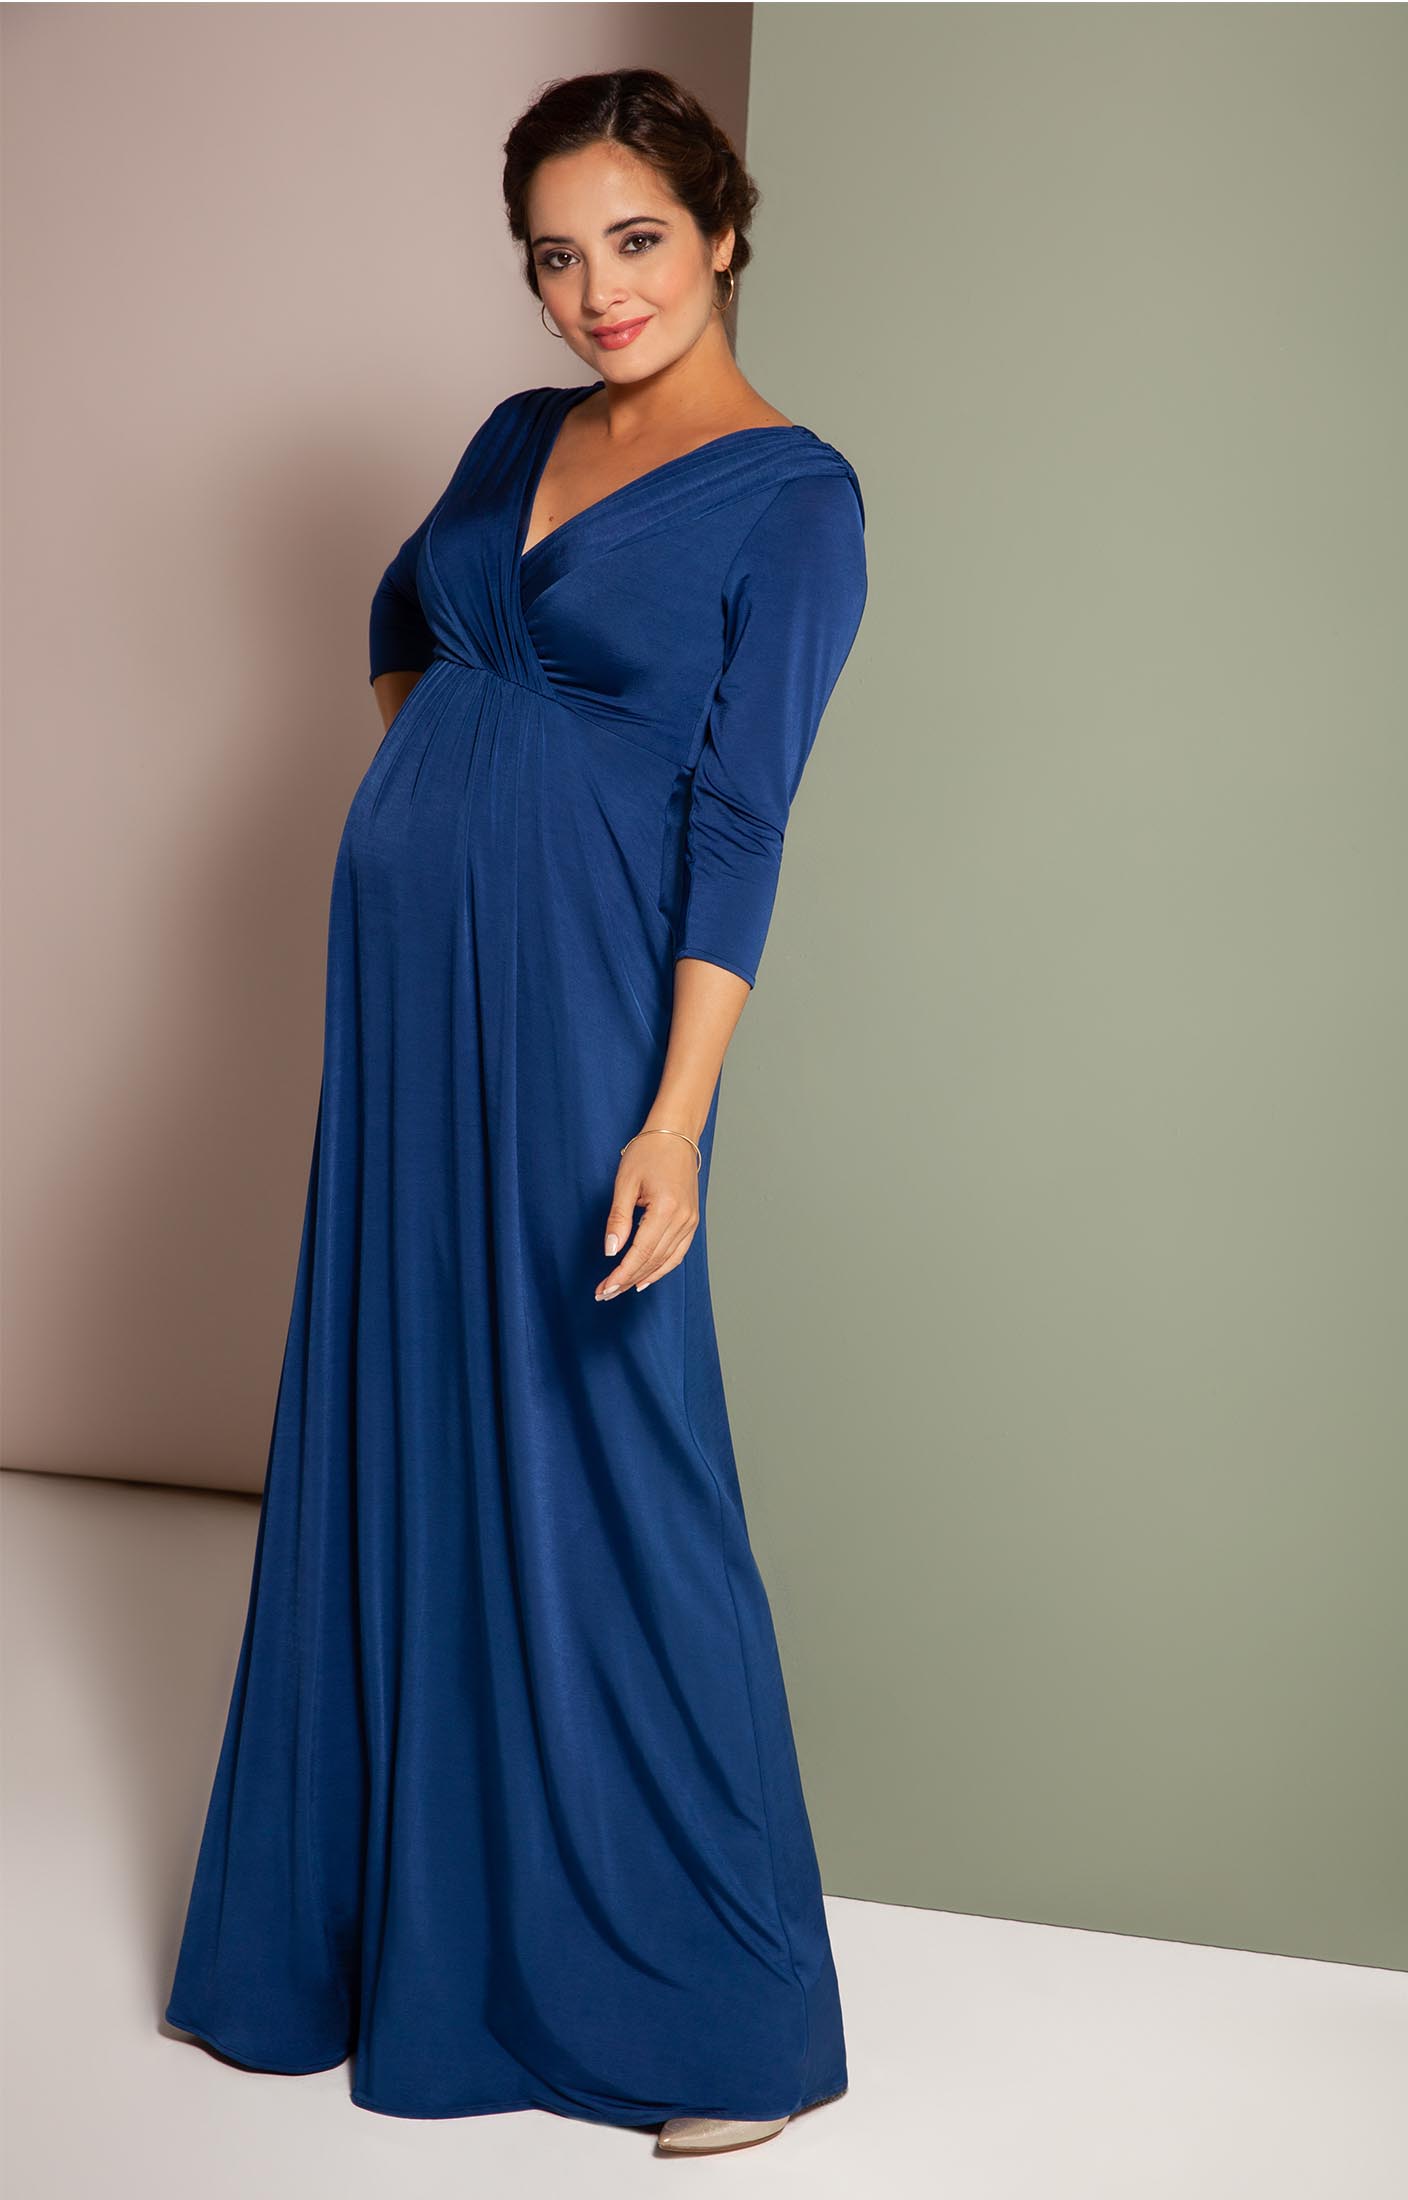 Willow Maternity Gown Imperial Blue - Maternity Wedding Dresses ...